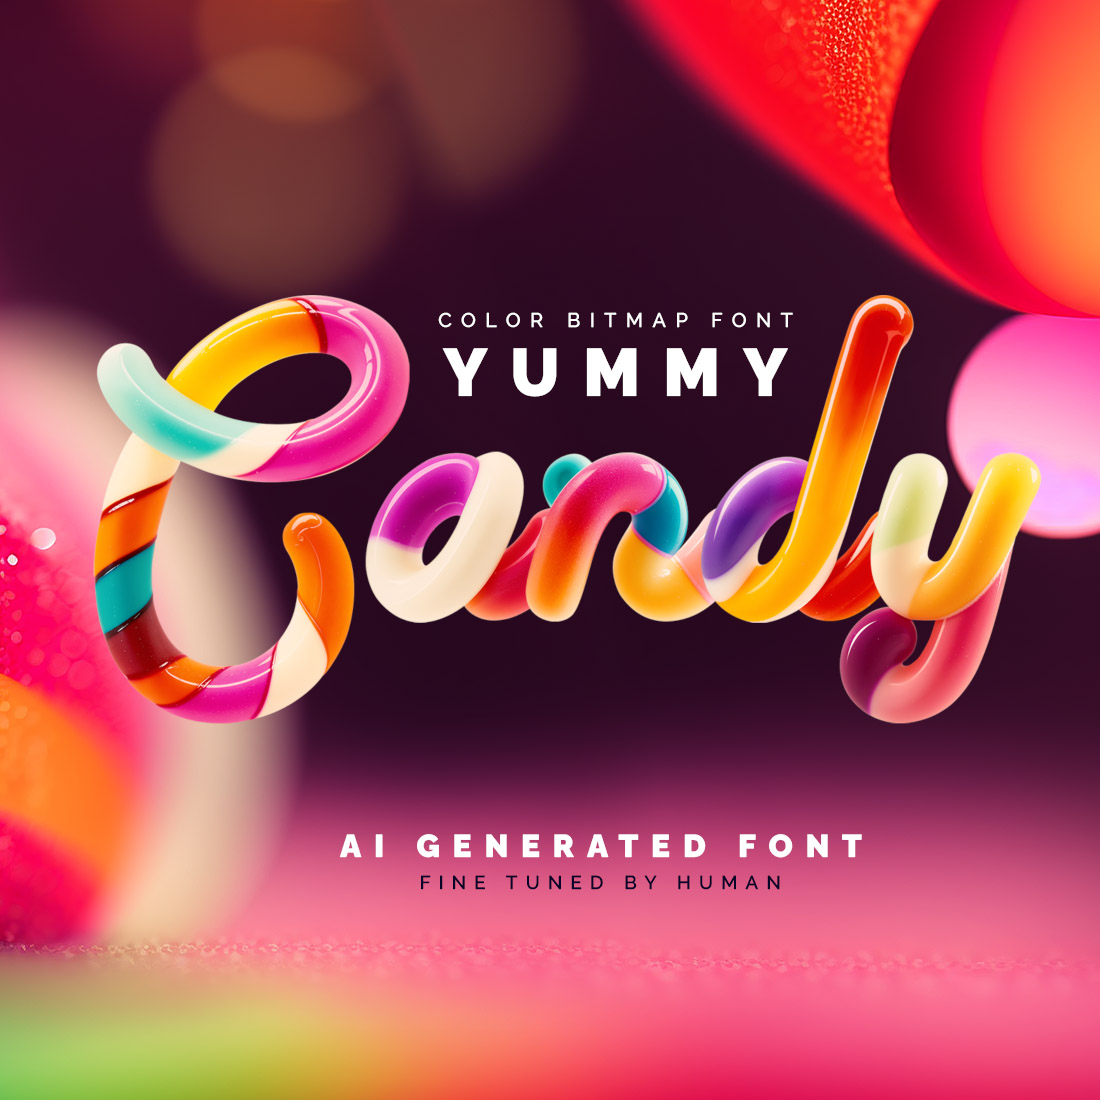 Yummy Candy - Color Bitmap Font cover image.